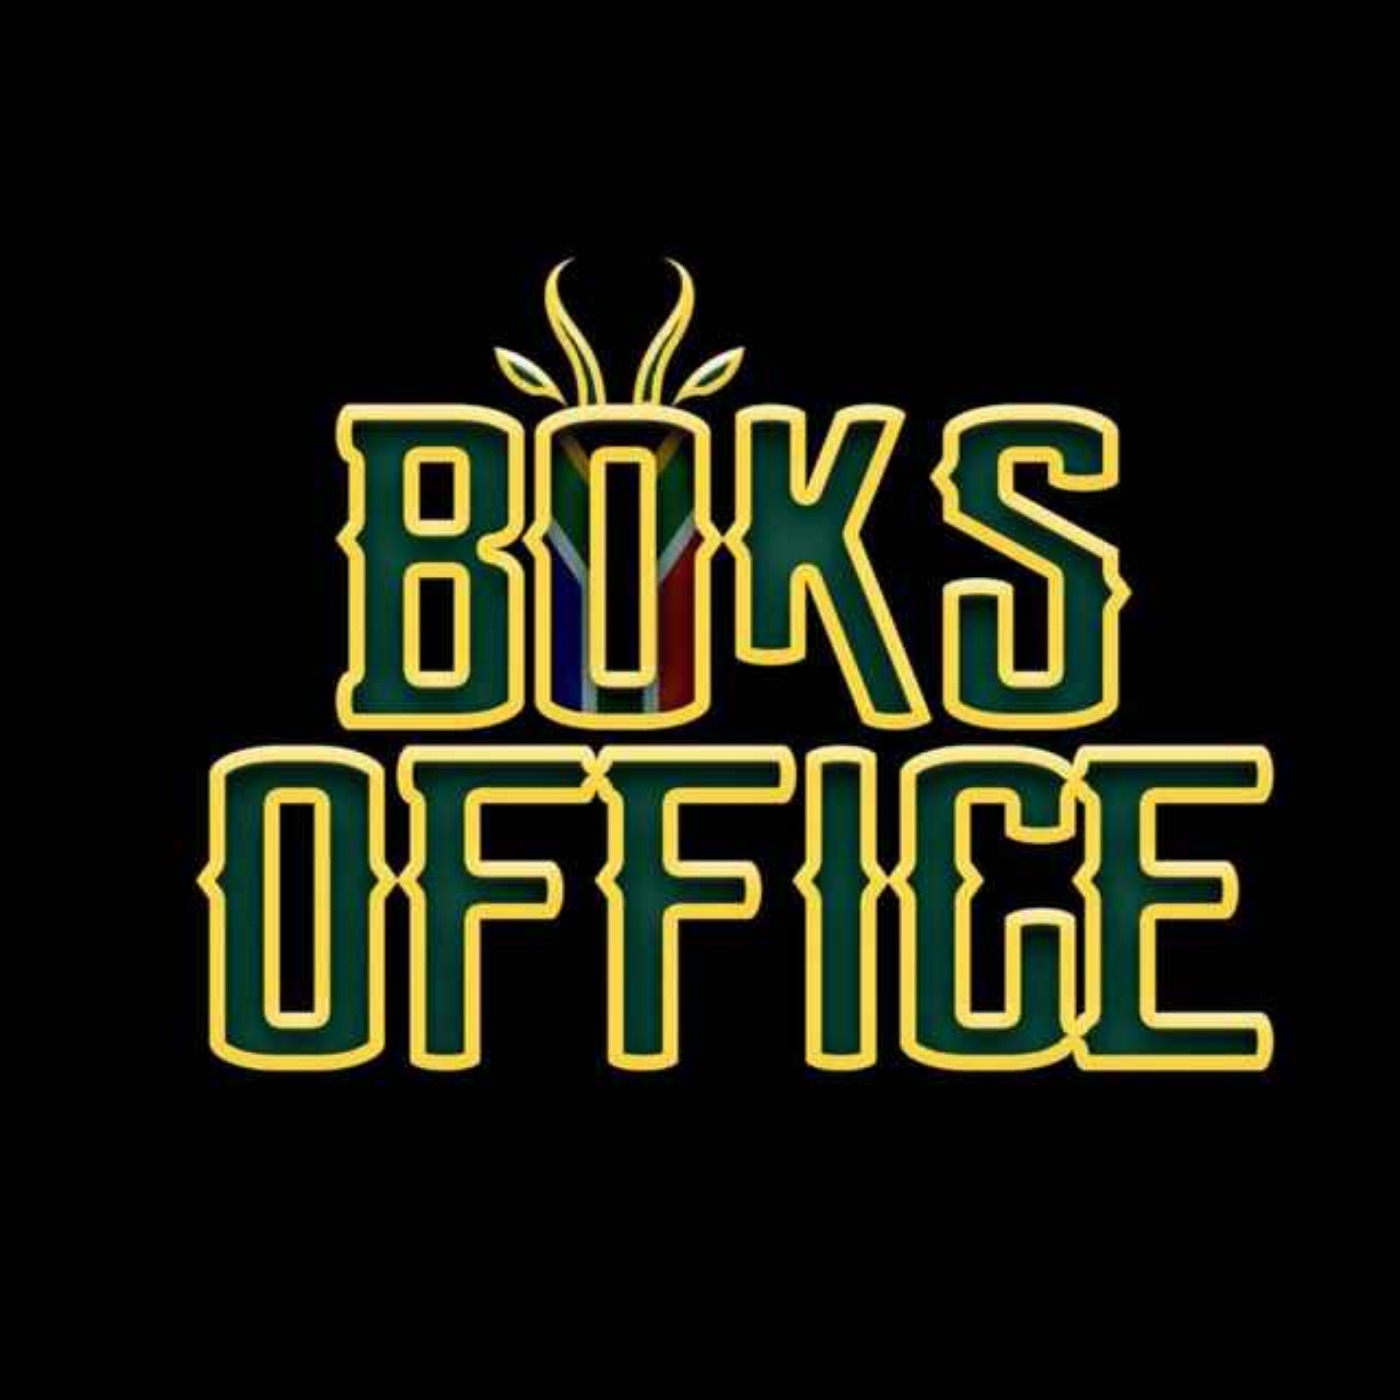 Boks Office - Episode 1 - Deon Fourie on His Fairytale Story To Becoming A World Champion - Rassie's Hilarious Nickname For Him & His Huge Bust Up With Schalk Burger!